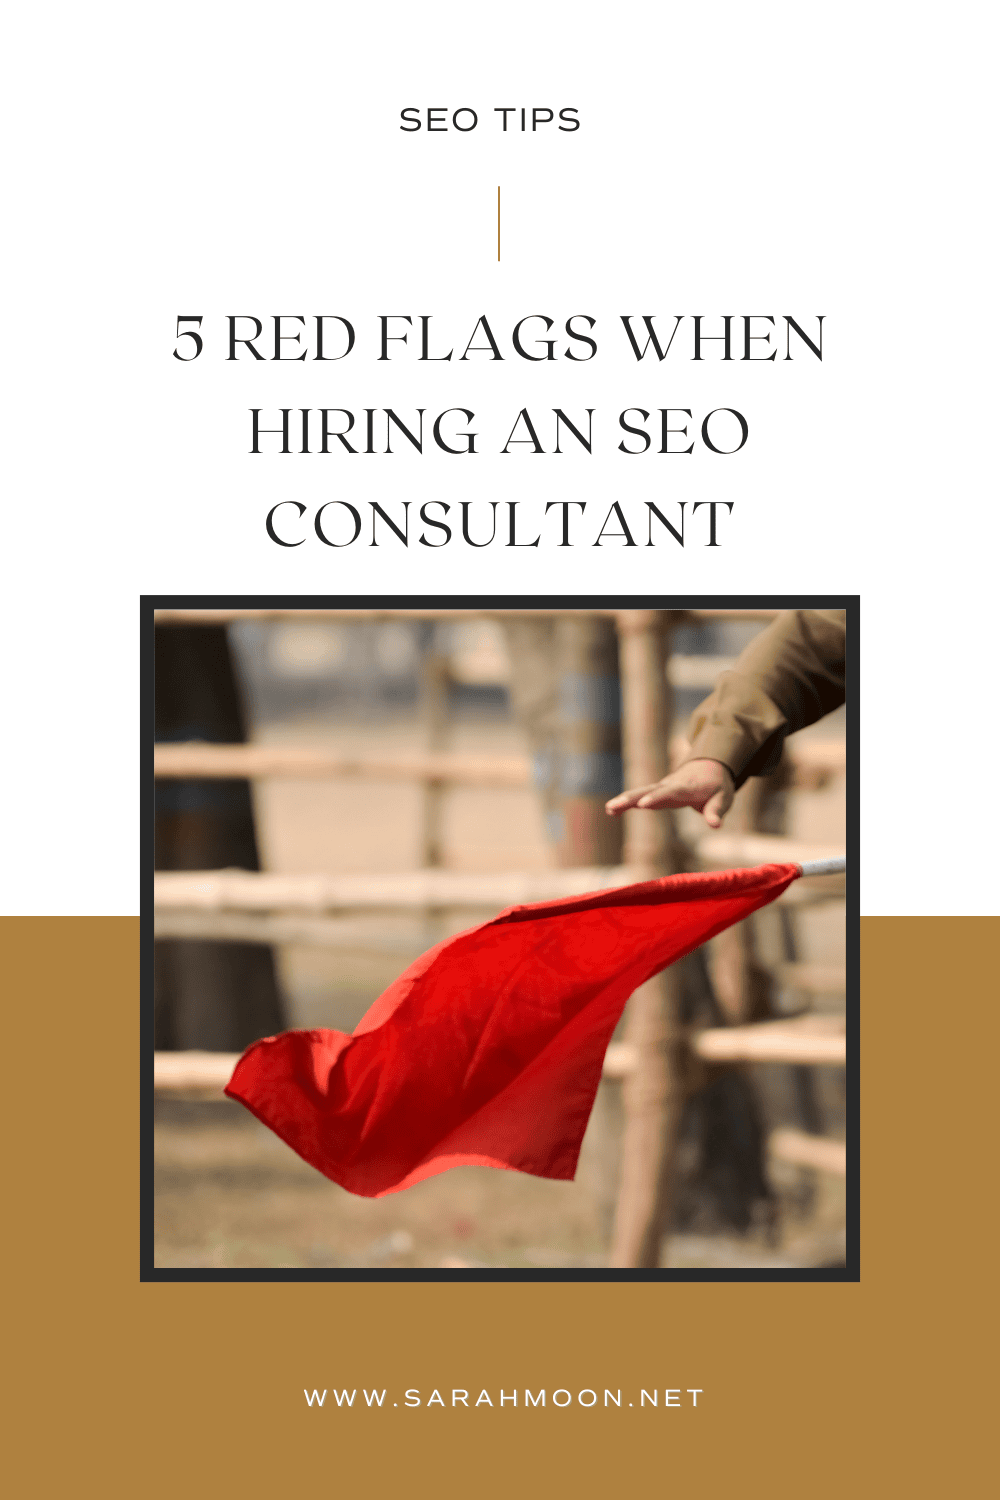 5 Red Flags When Hiring an SEO Consultant